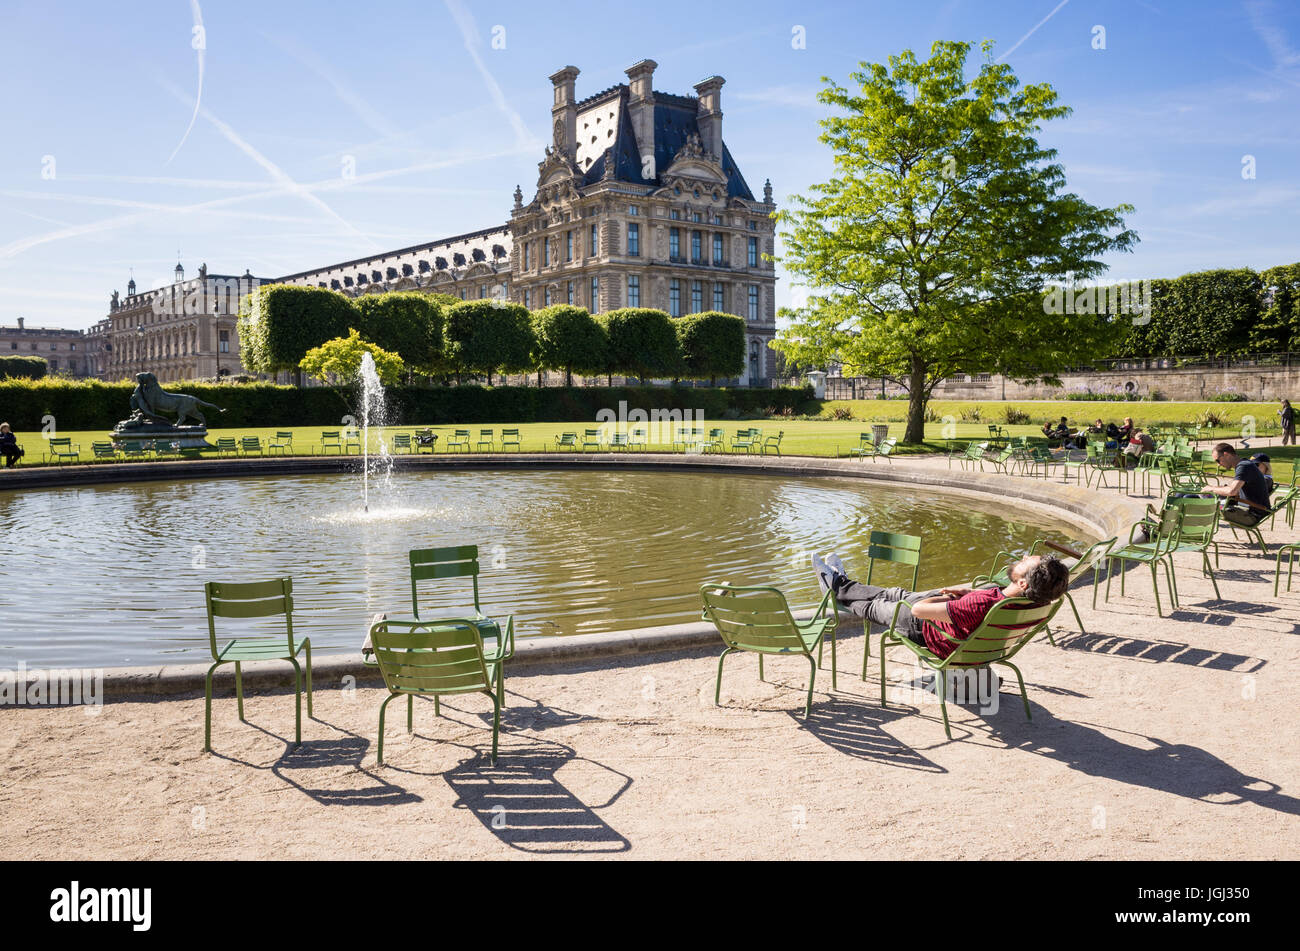 The Tuileries garden in Paris, France, by a sunny morning with a man resting on a metal lawn chair near a water basin and the Louvre palace. Stock Photo